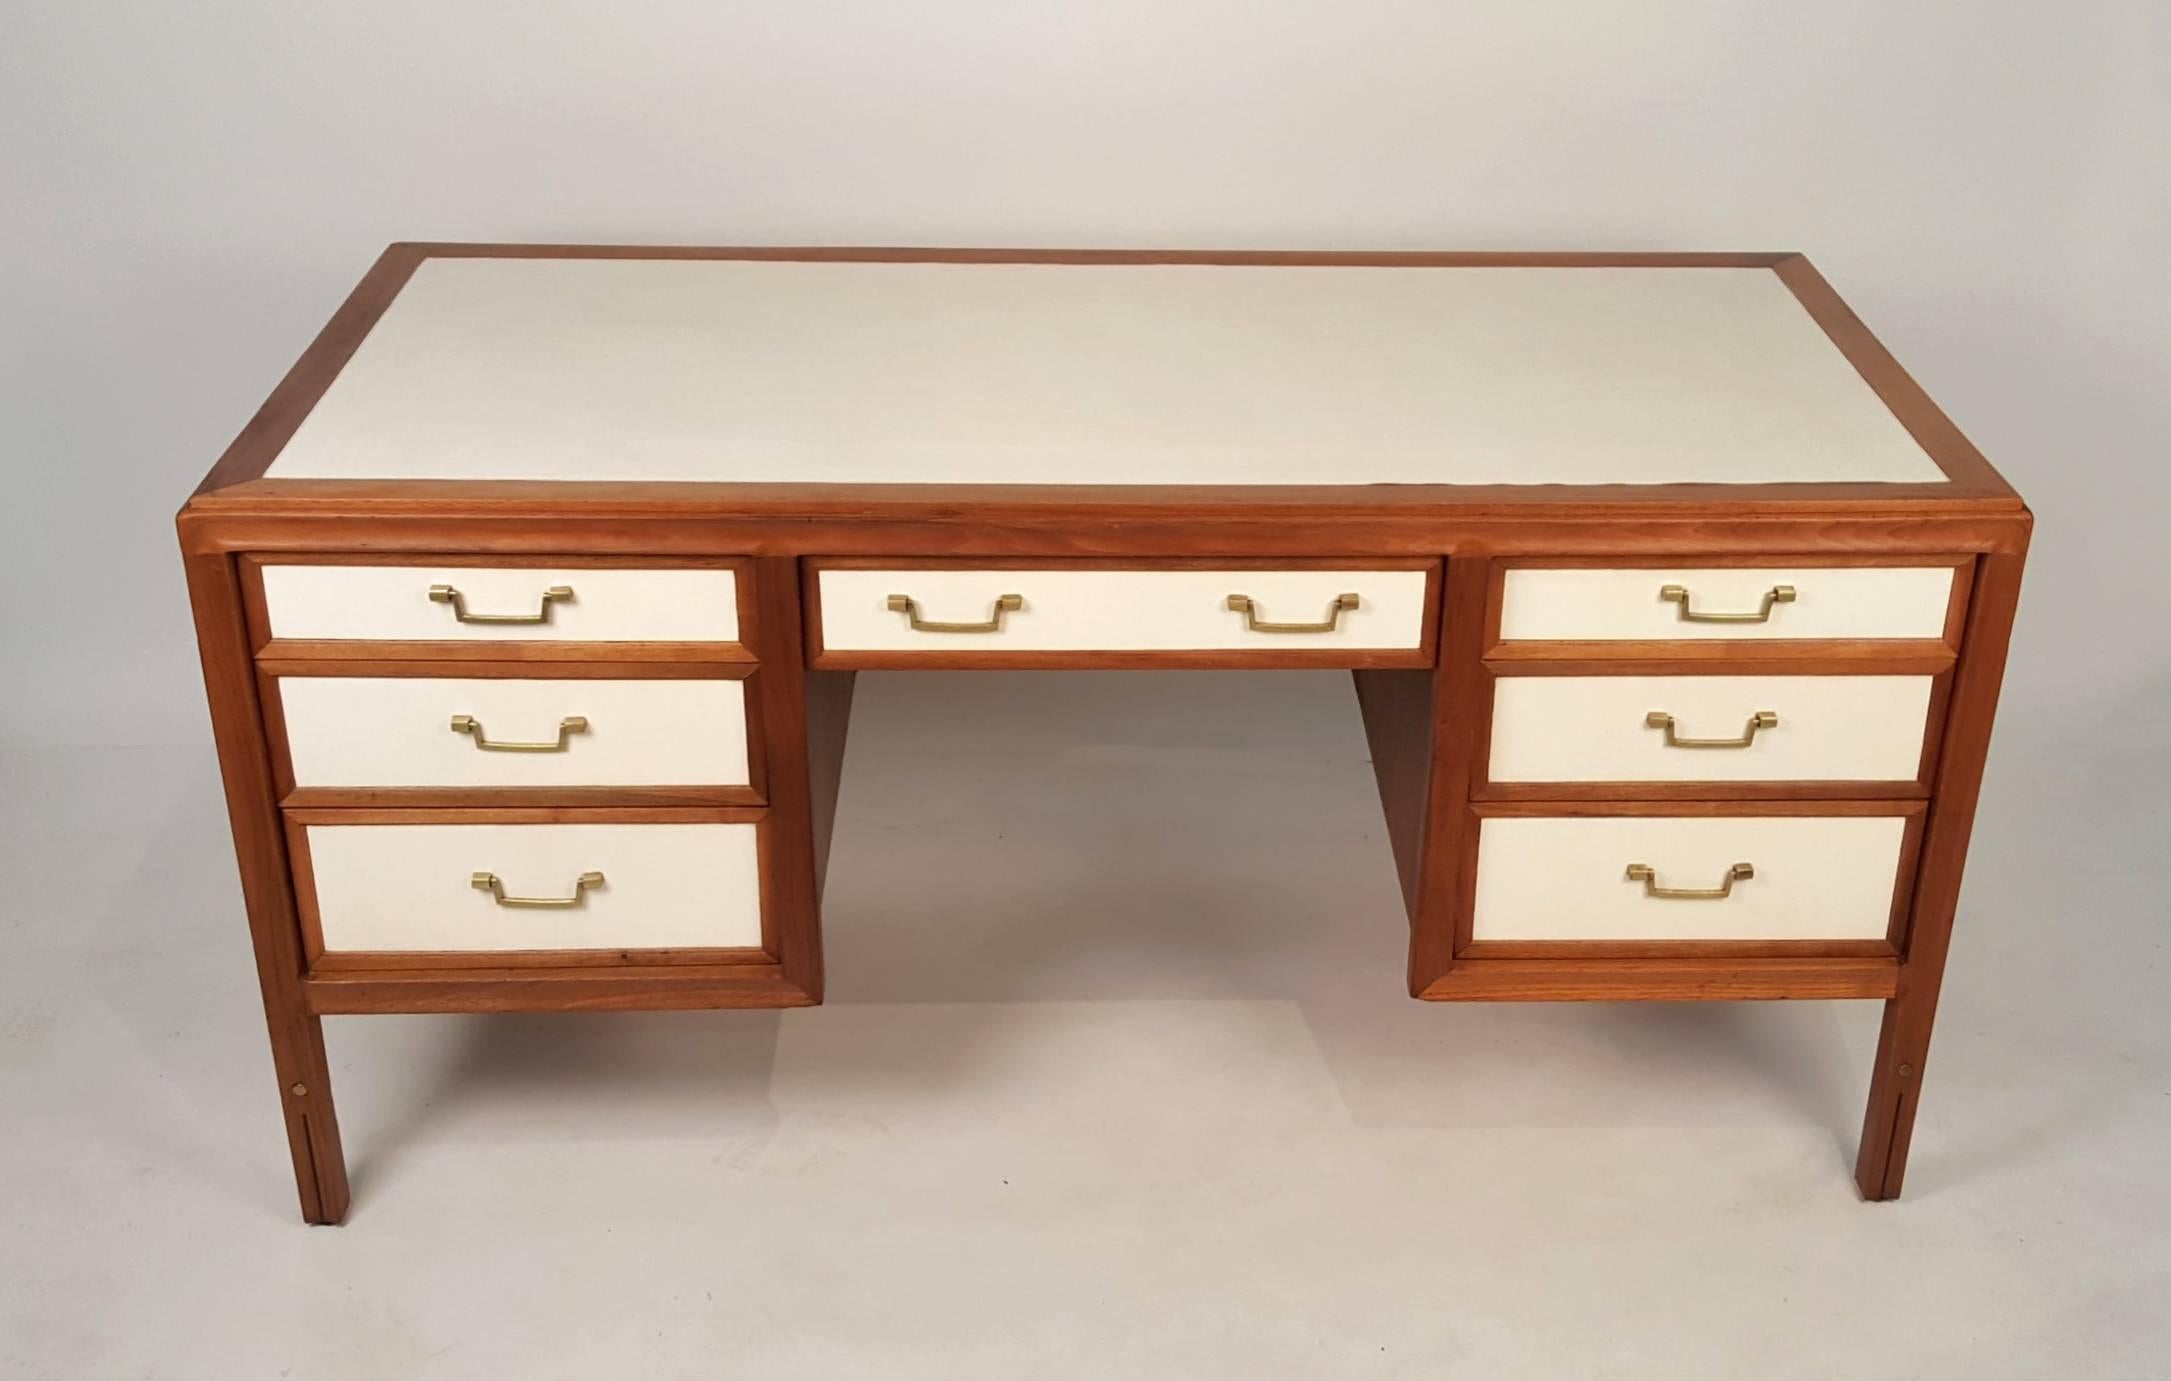 Unusual walnut campaign desk with leather top and drawers by Gerry Zanck for Gregori. Solid brass hardware. Solid scalloped walnut frame. Original leather in very good condition.